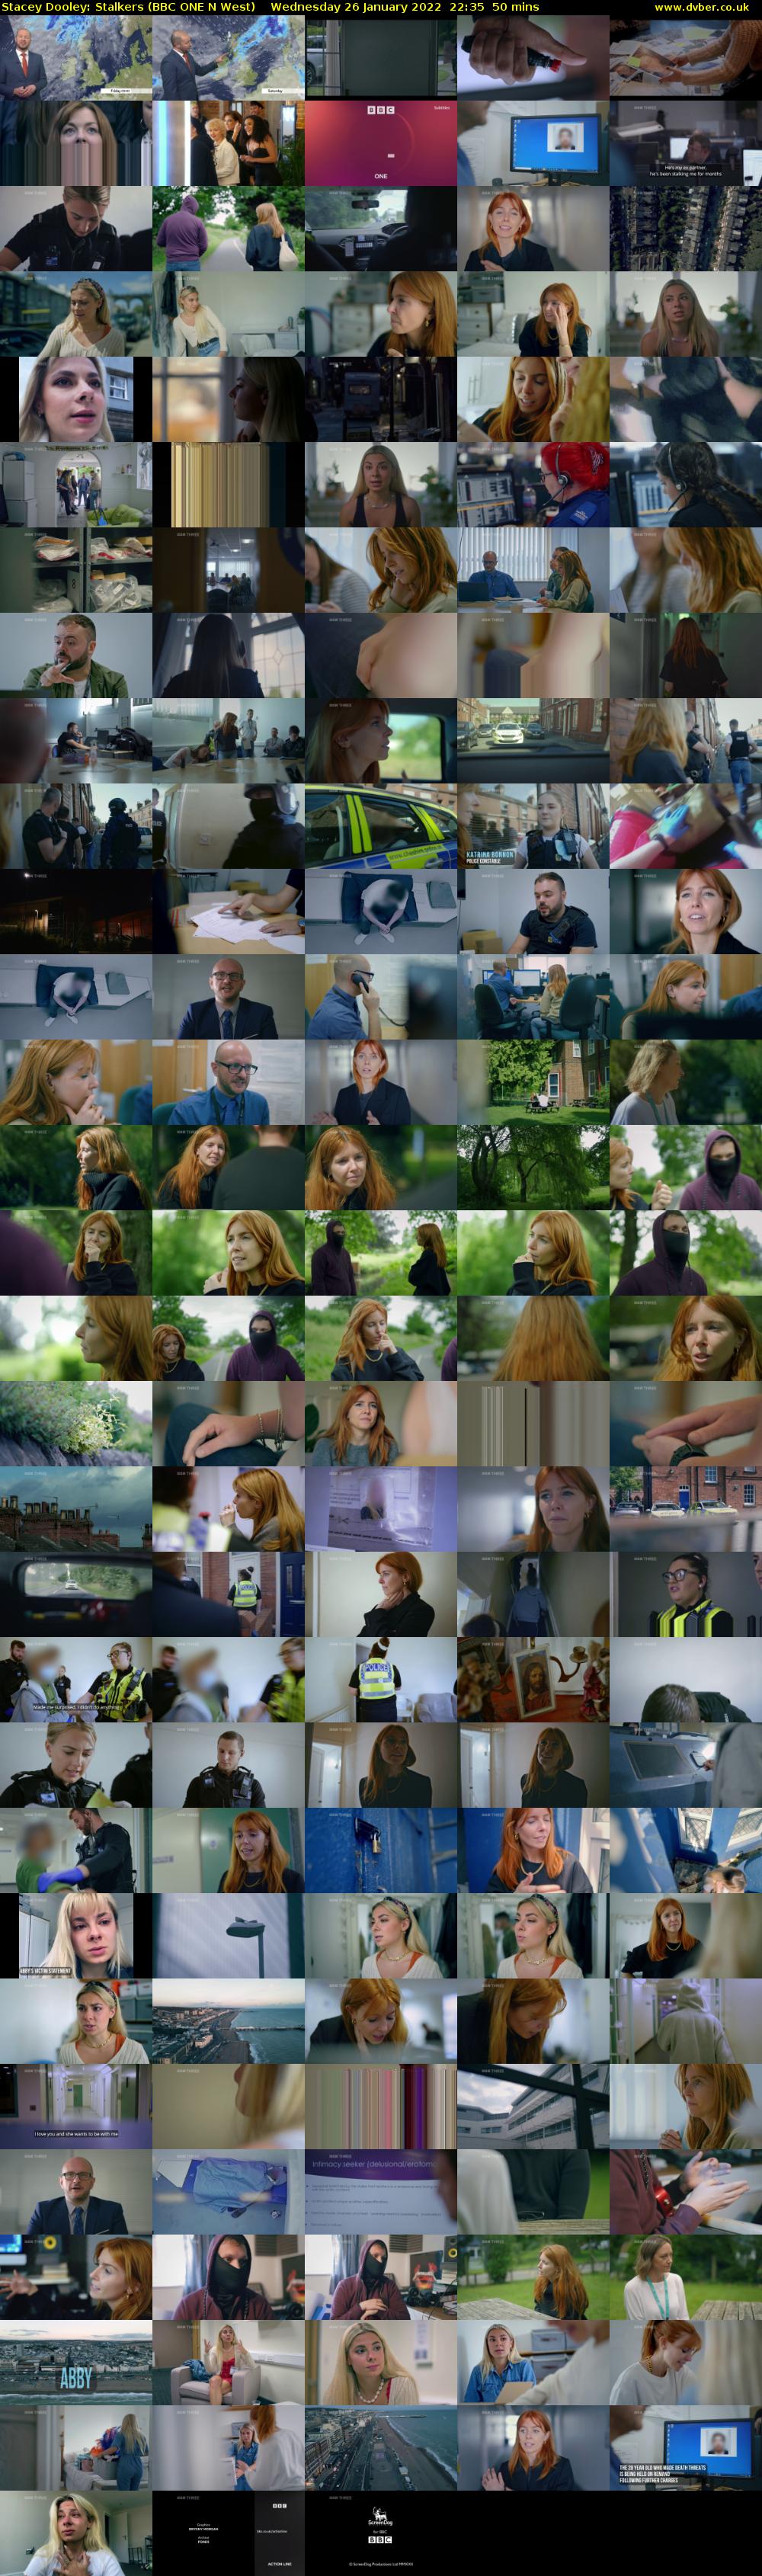 Stacey Dooley: Stalkers (BBC ONE N West) Wednesday 26 January 2022 22:35 - 23:25